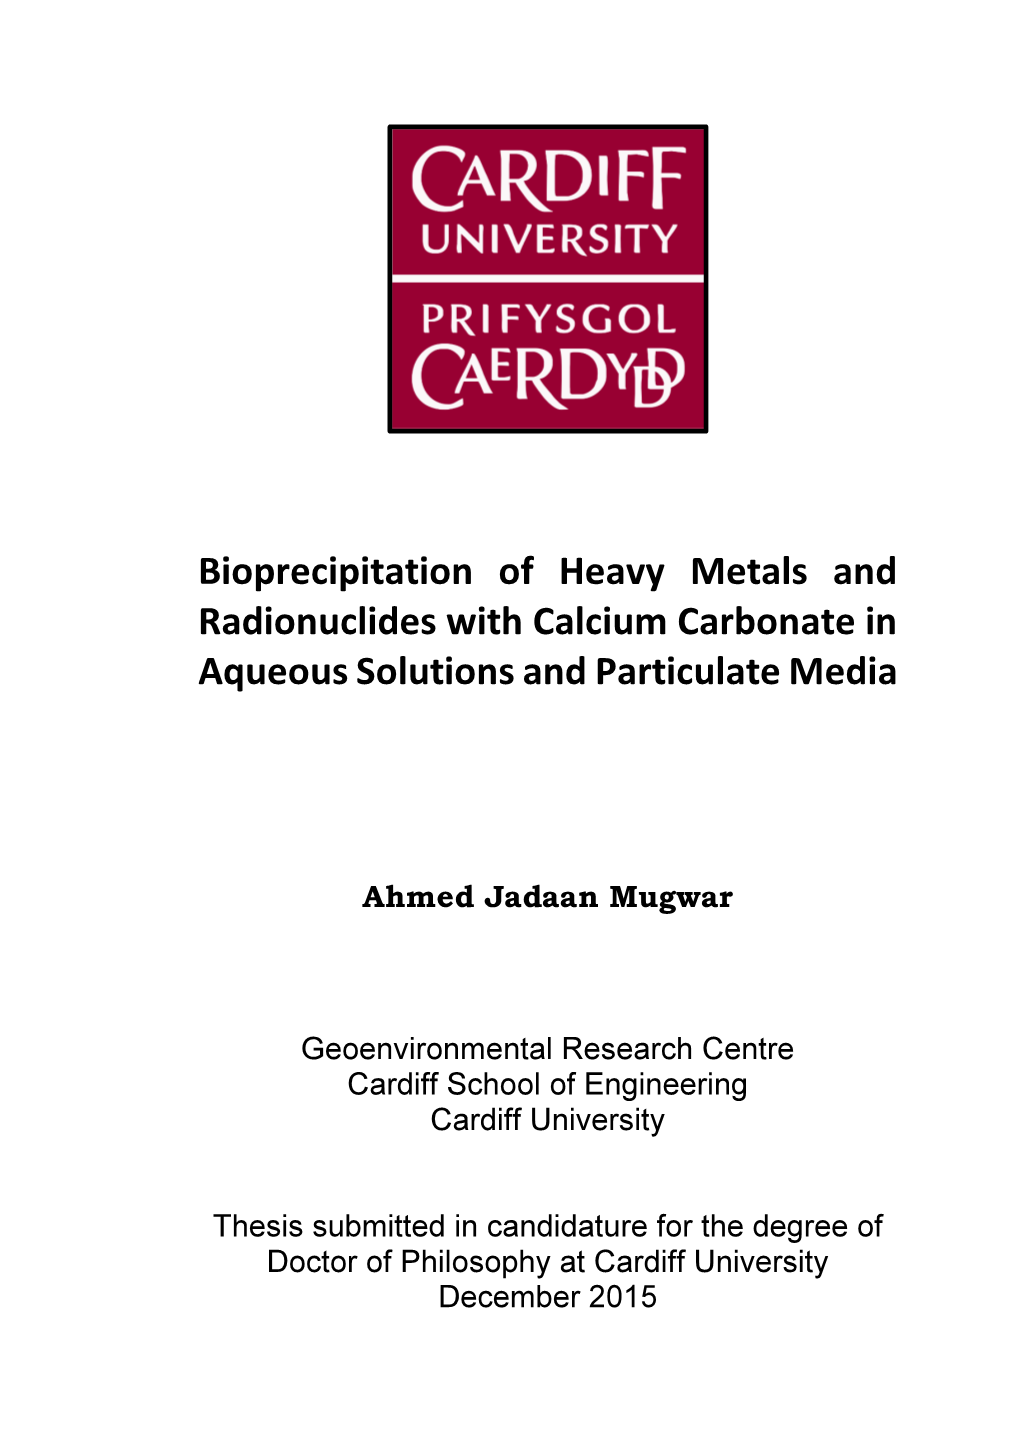 Bioprecipitation of Heavy Metals and Radionuclides with Calcium Carbonate in Aqueous Solutions and Particulate Media